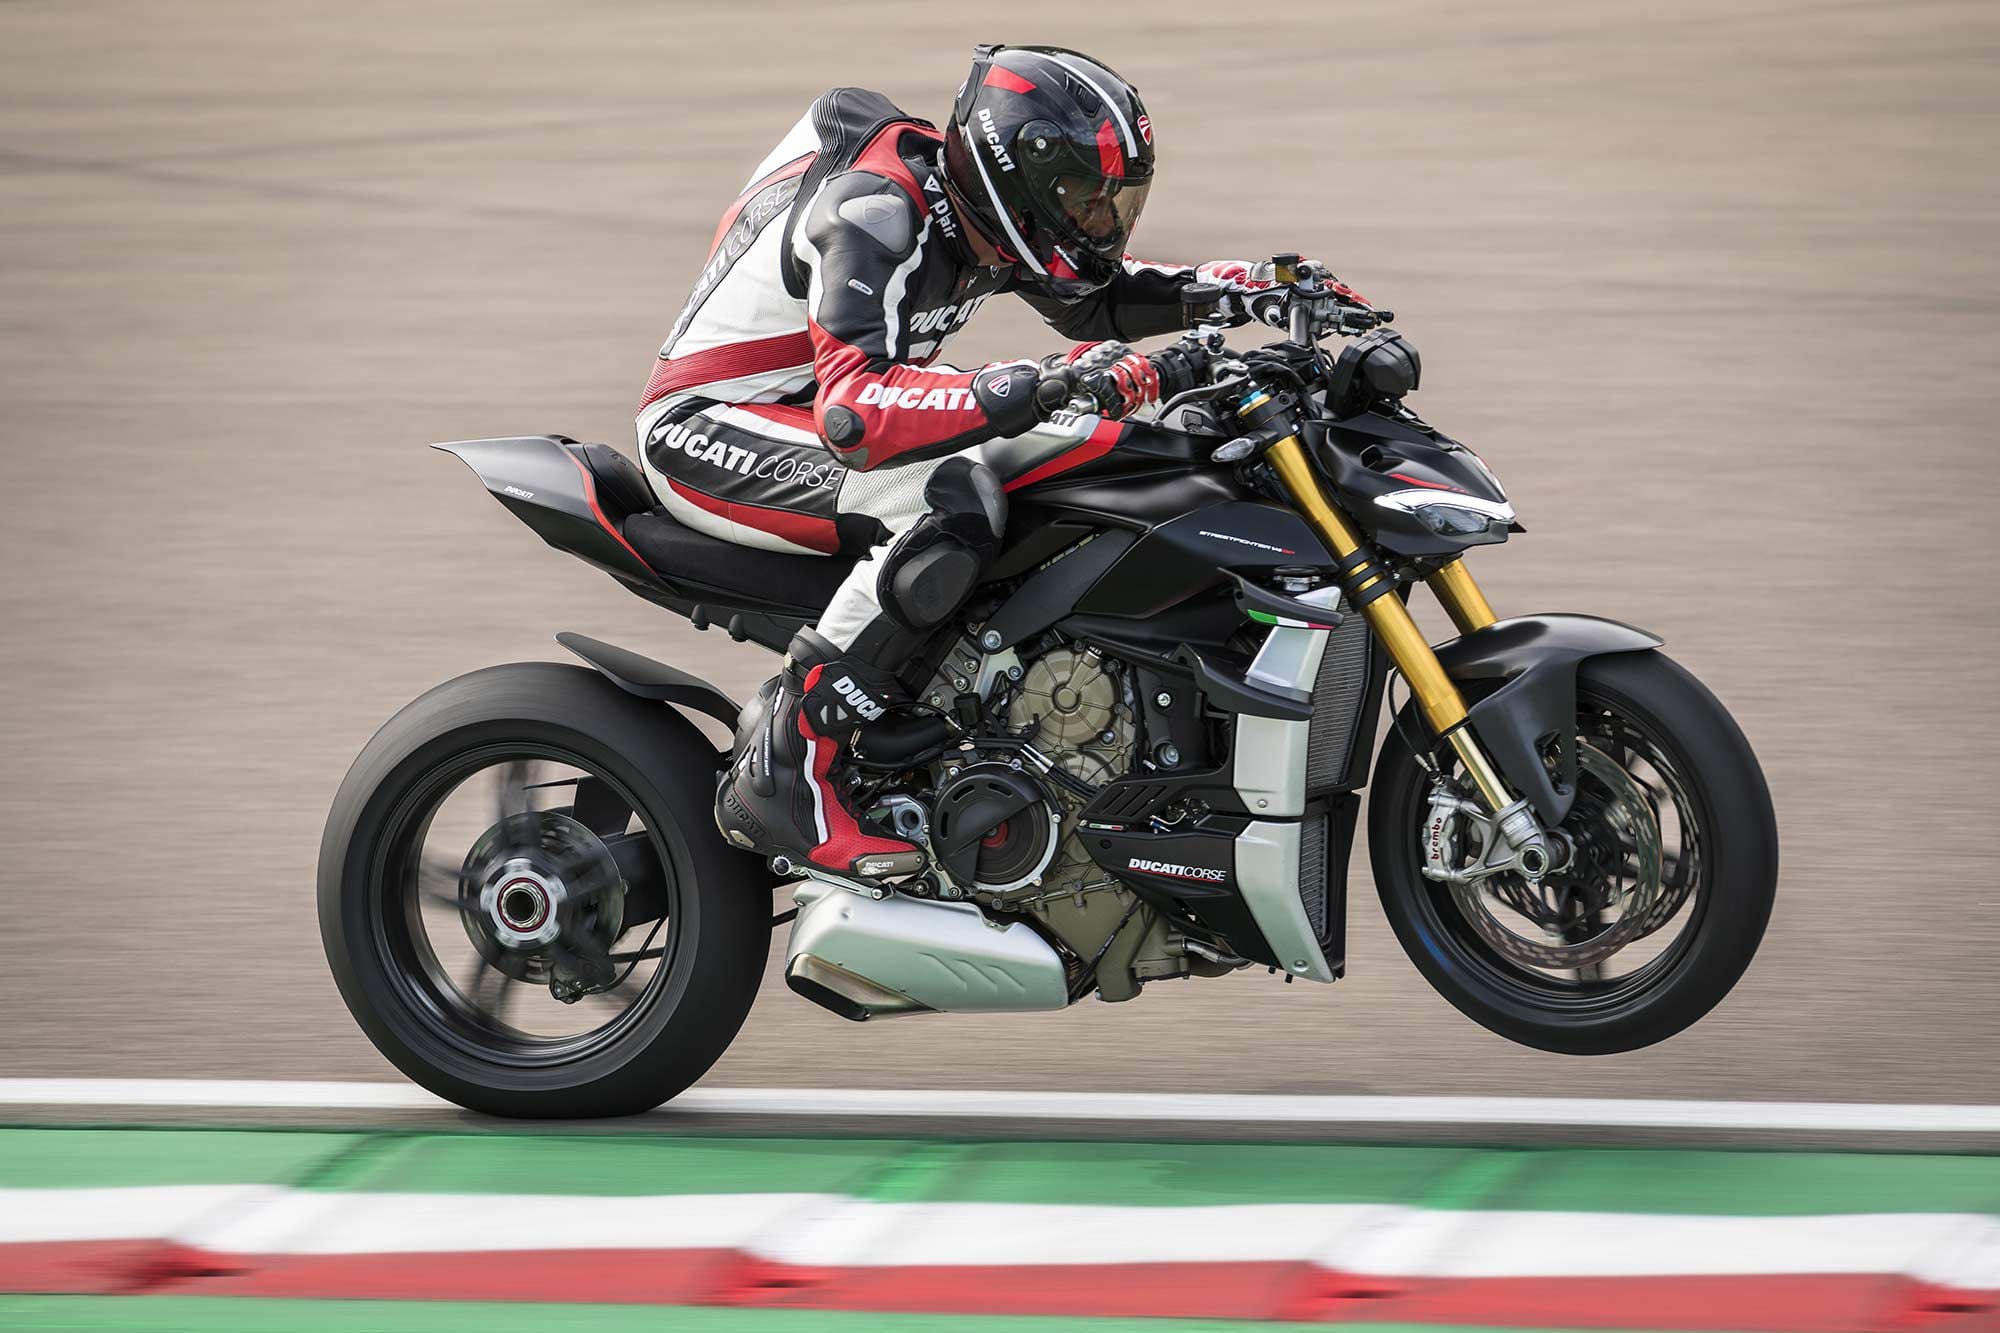 With its minimal bodywork and aggressive attitude, the Streetfighter V4 SP screams hooligan bike. But with its Ducati V-4 engine, it promises more. Premium hooligan?